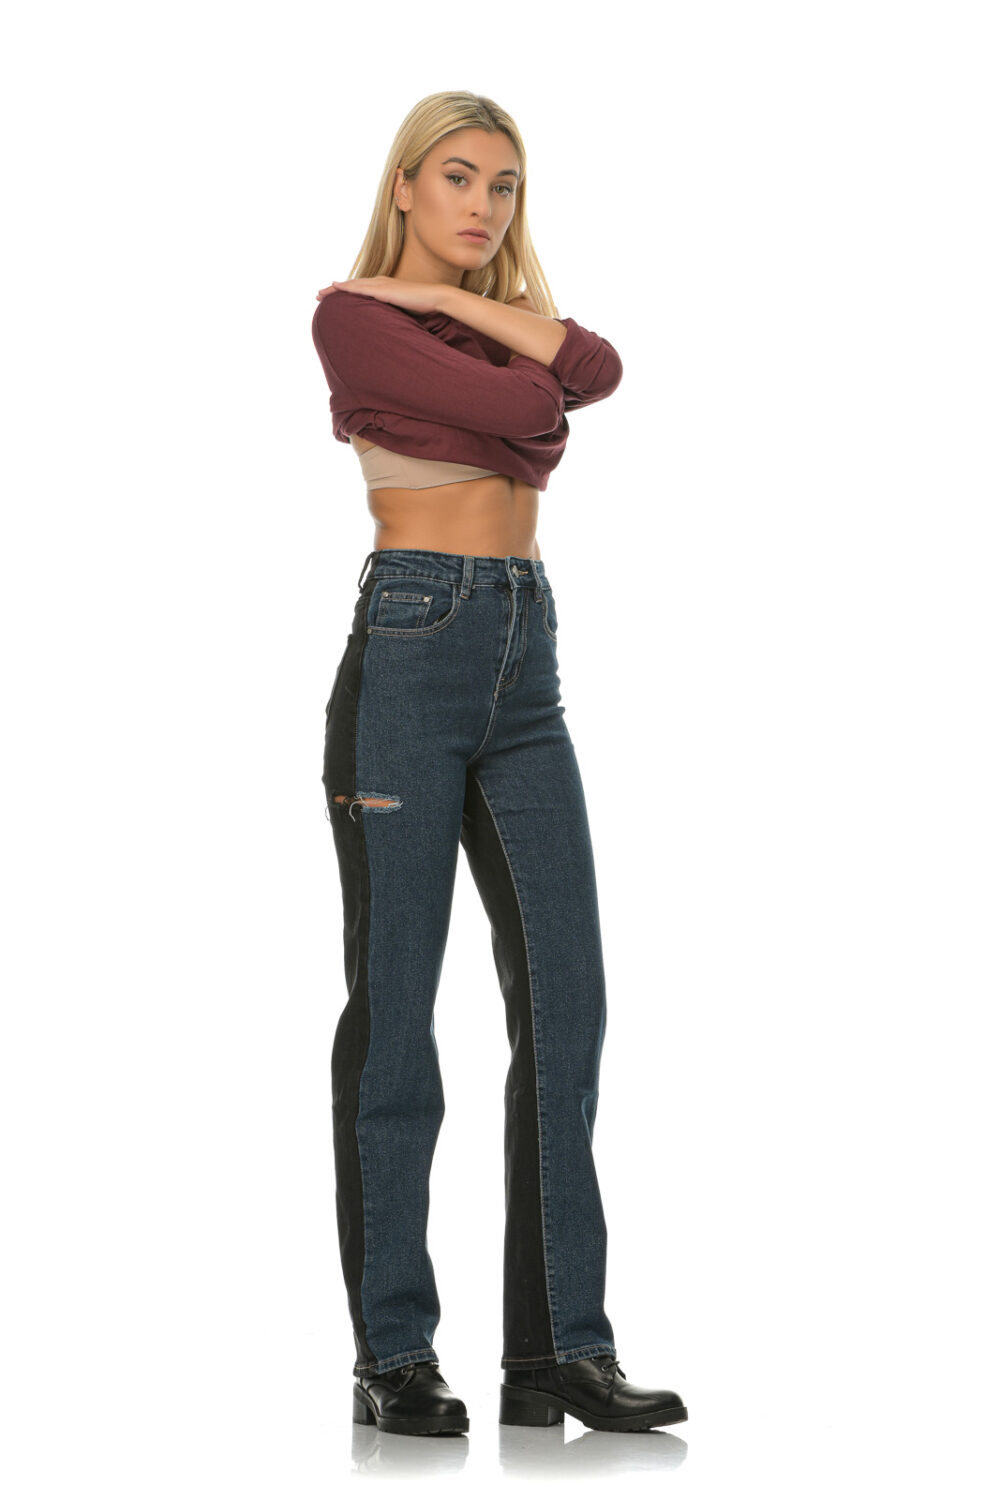 Double high waisted elastic jeans (blue front and black back)